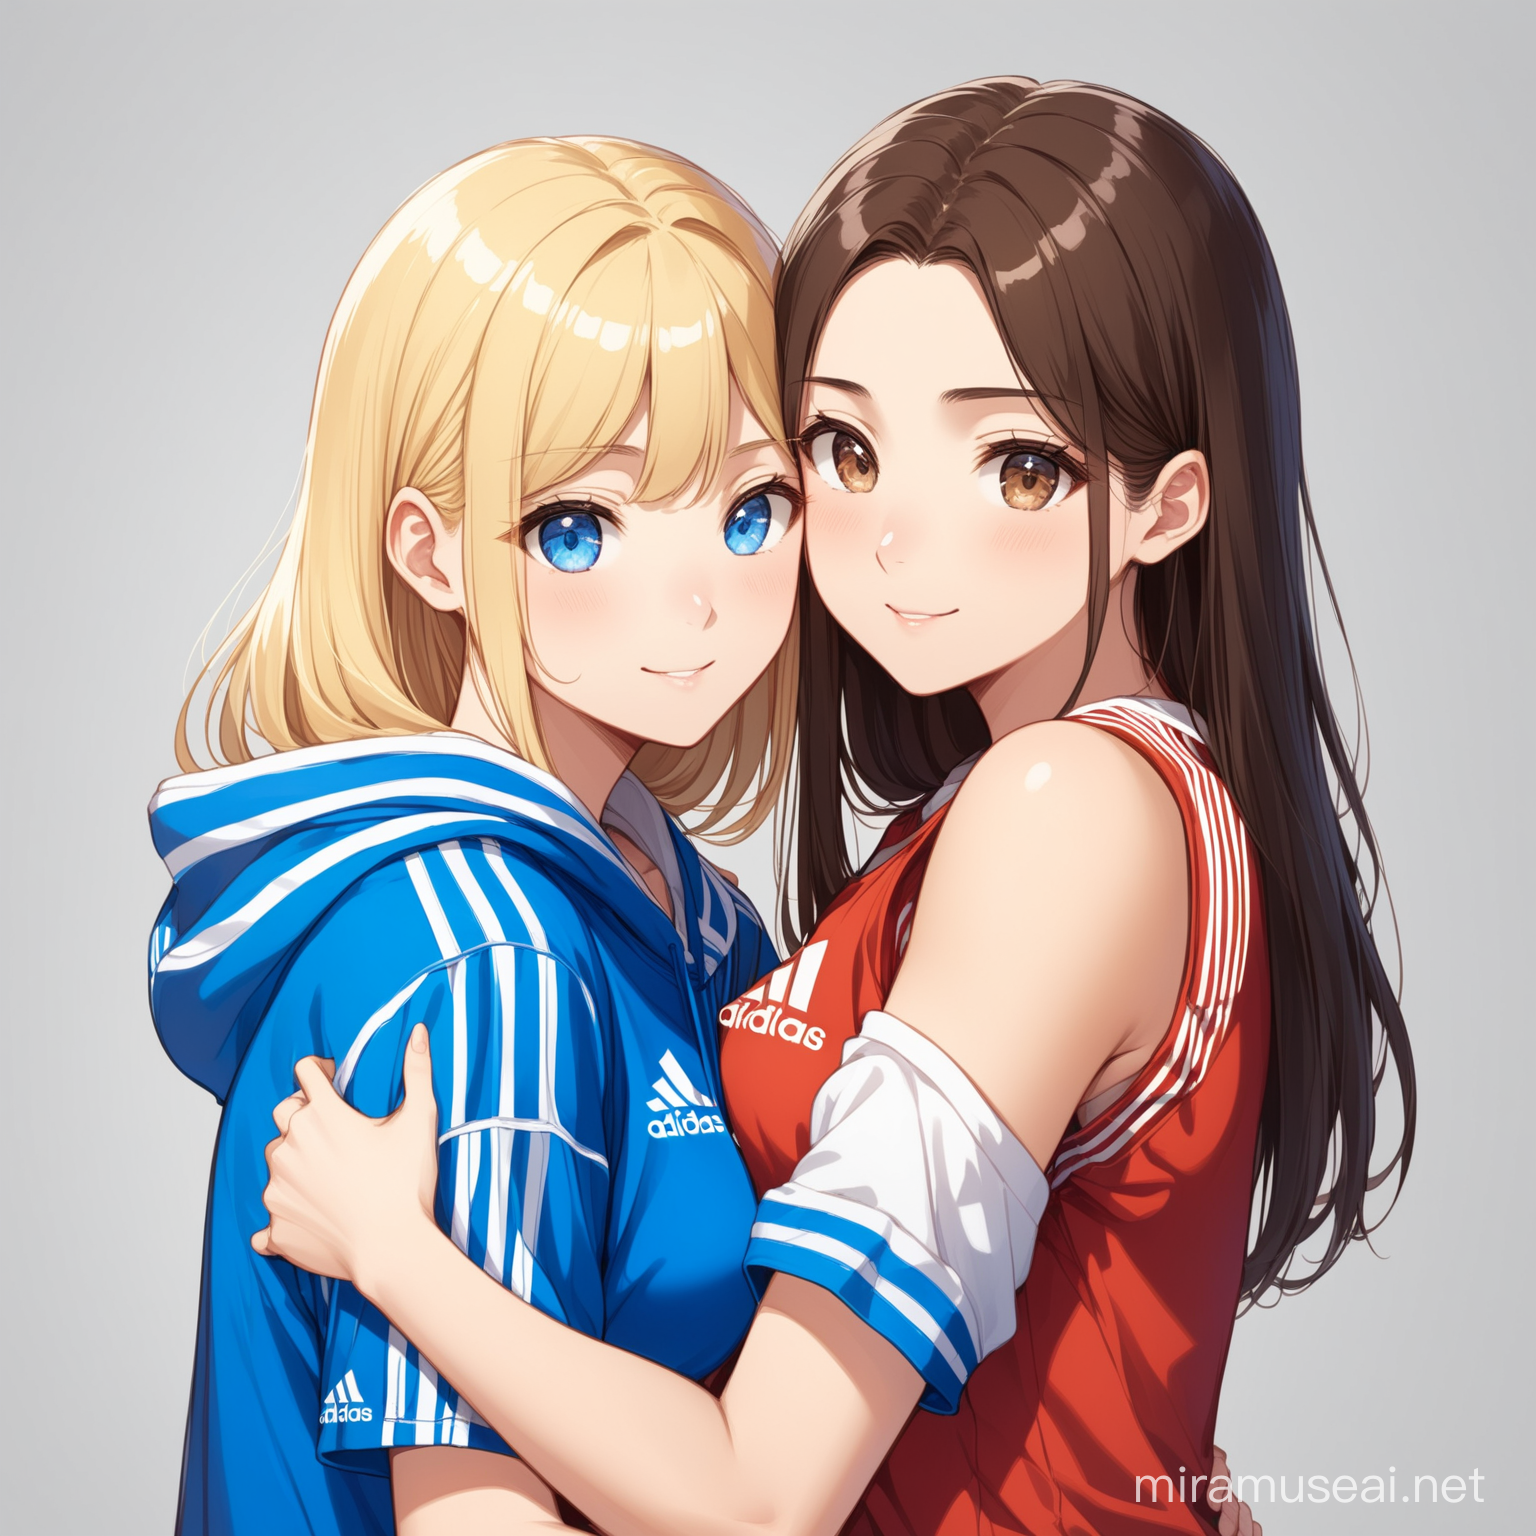 Blonde and Brunette Embrace in Matching Adidas Outfits